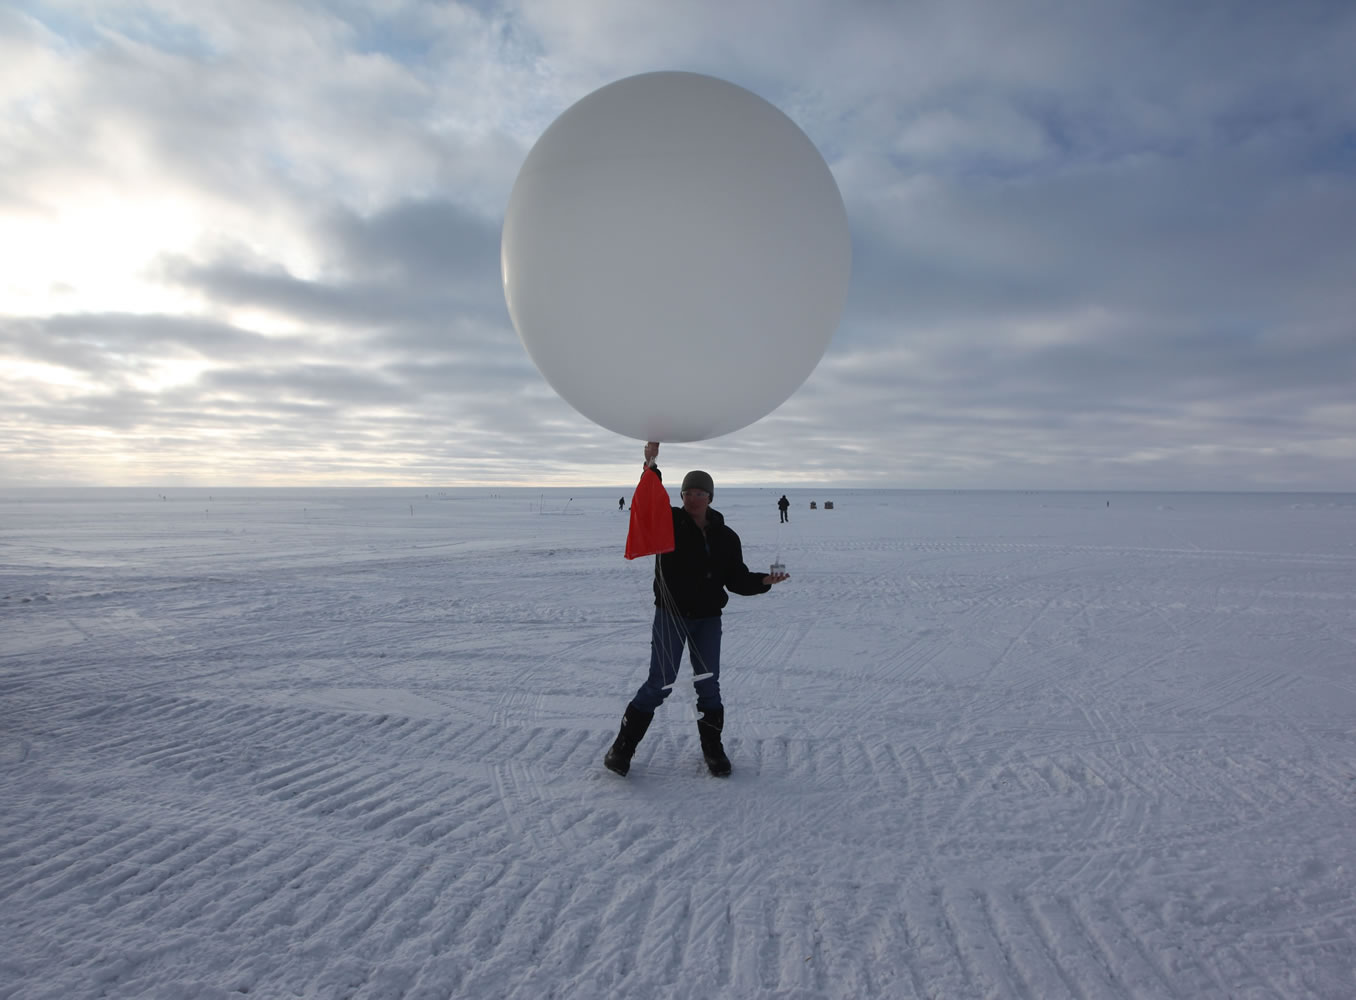 Atop roughly two miles of ice, technician Marie McLane launches a data-transmitting weather balloon July 15 at Summit Station, a remote research site operated by the U.S. National Science Foundation (NSF), and situated 10,500 feet above sea level, on top of the Greenland ice sheet.